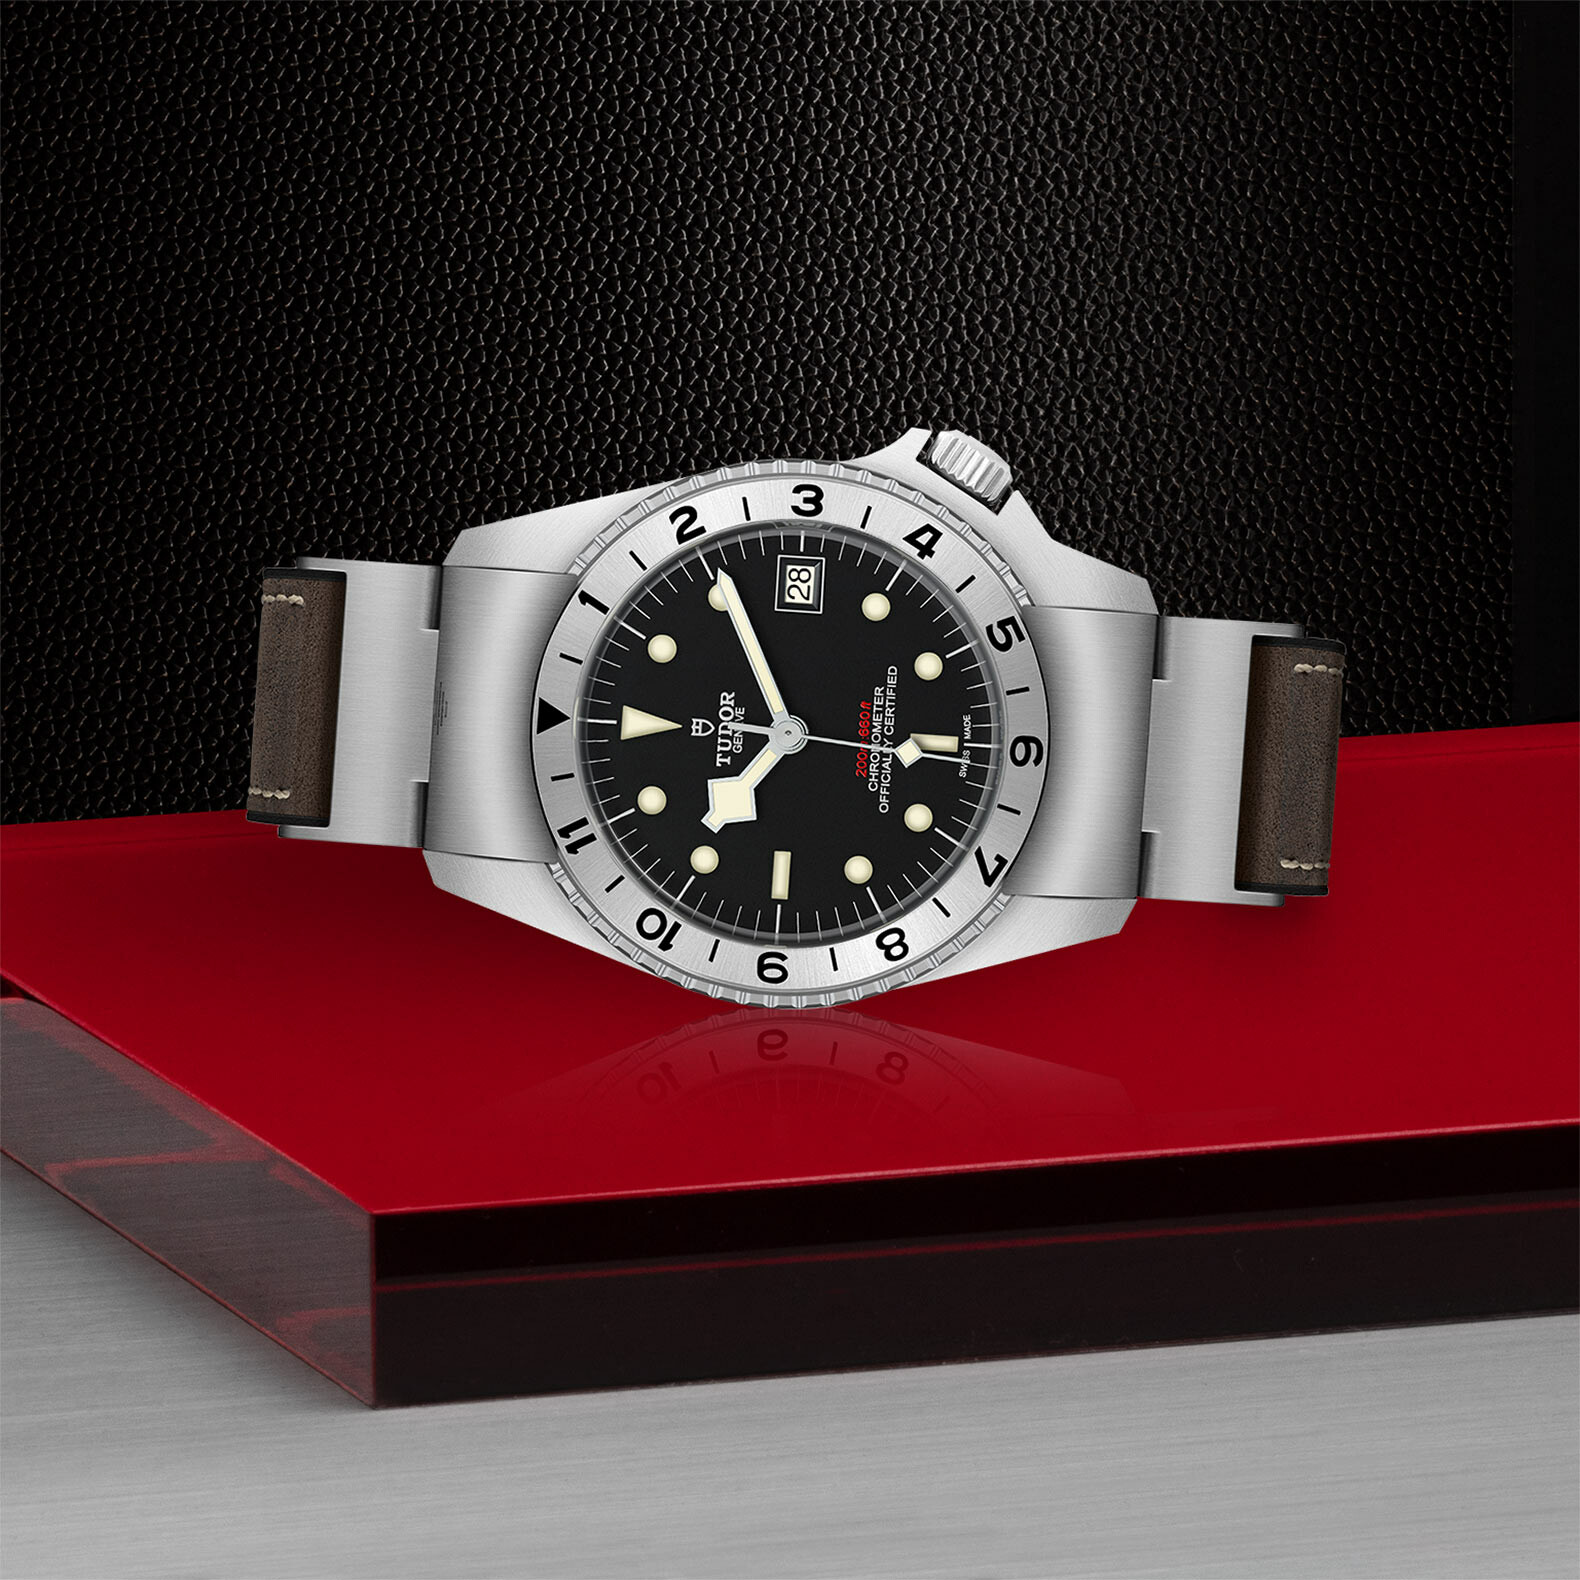 Purchase TUDOR Black Bay P01 watch, 42 mm steel case, brown leather strap